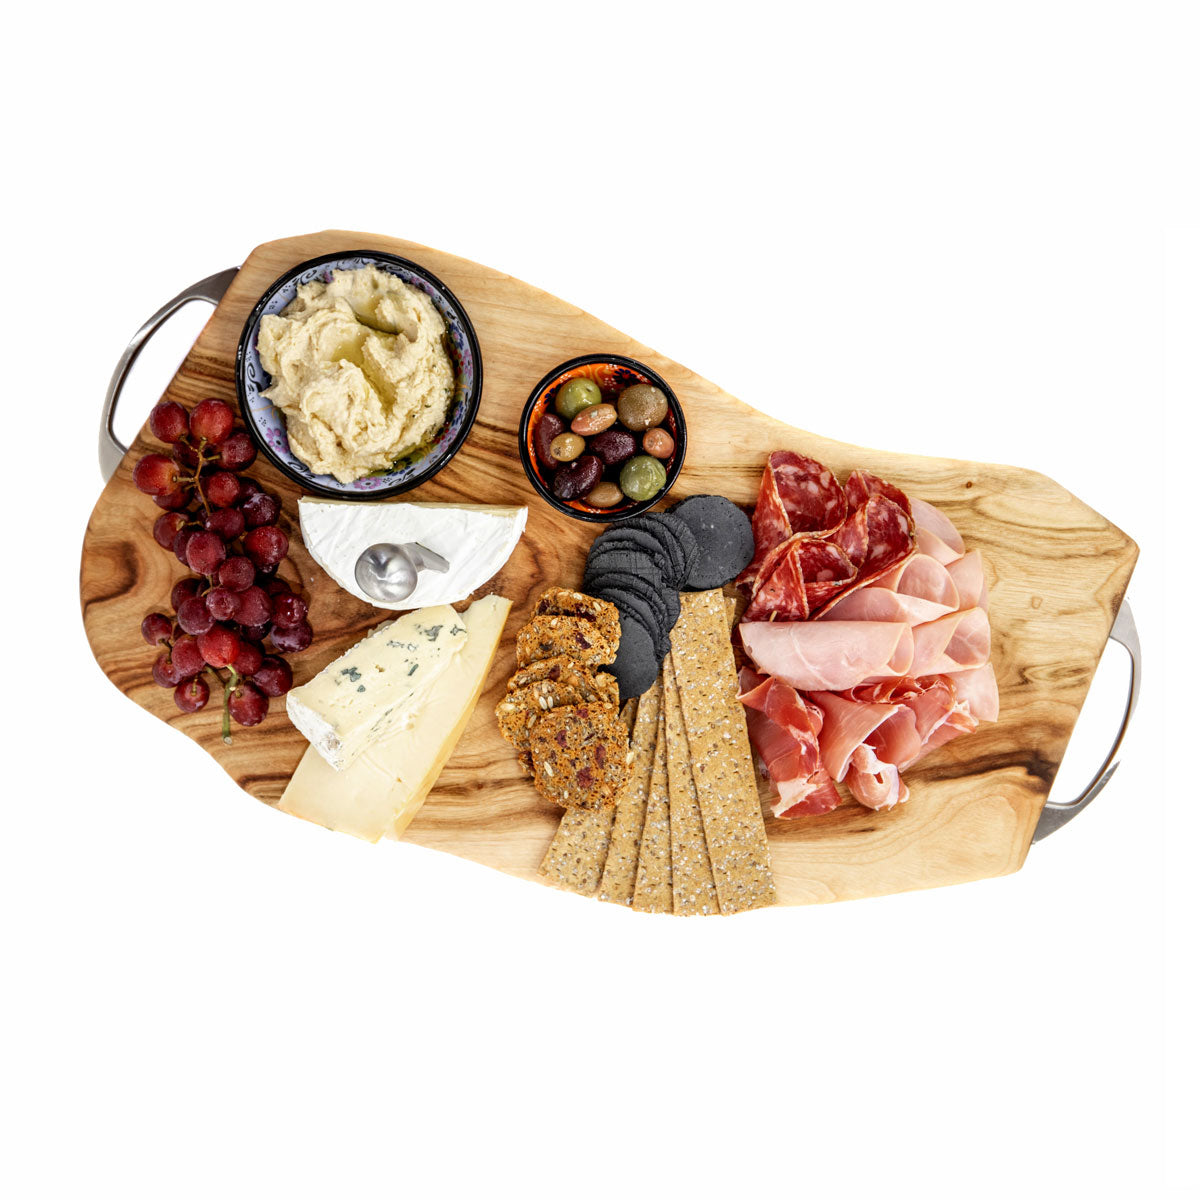 A large wood serving platter or wooden chopping board with stainless steel handles, made from camphor laurel timber designed by Nature's Boards, loaded up with cheese, crackers, olives, cured meat, hummus and grapes.